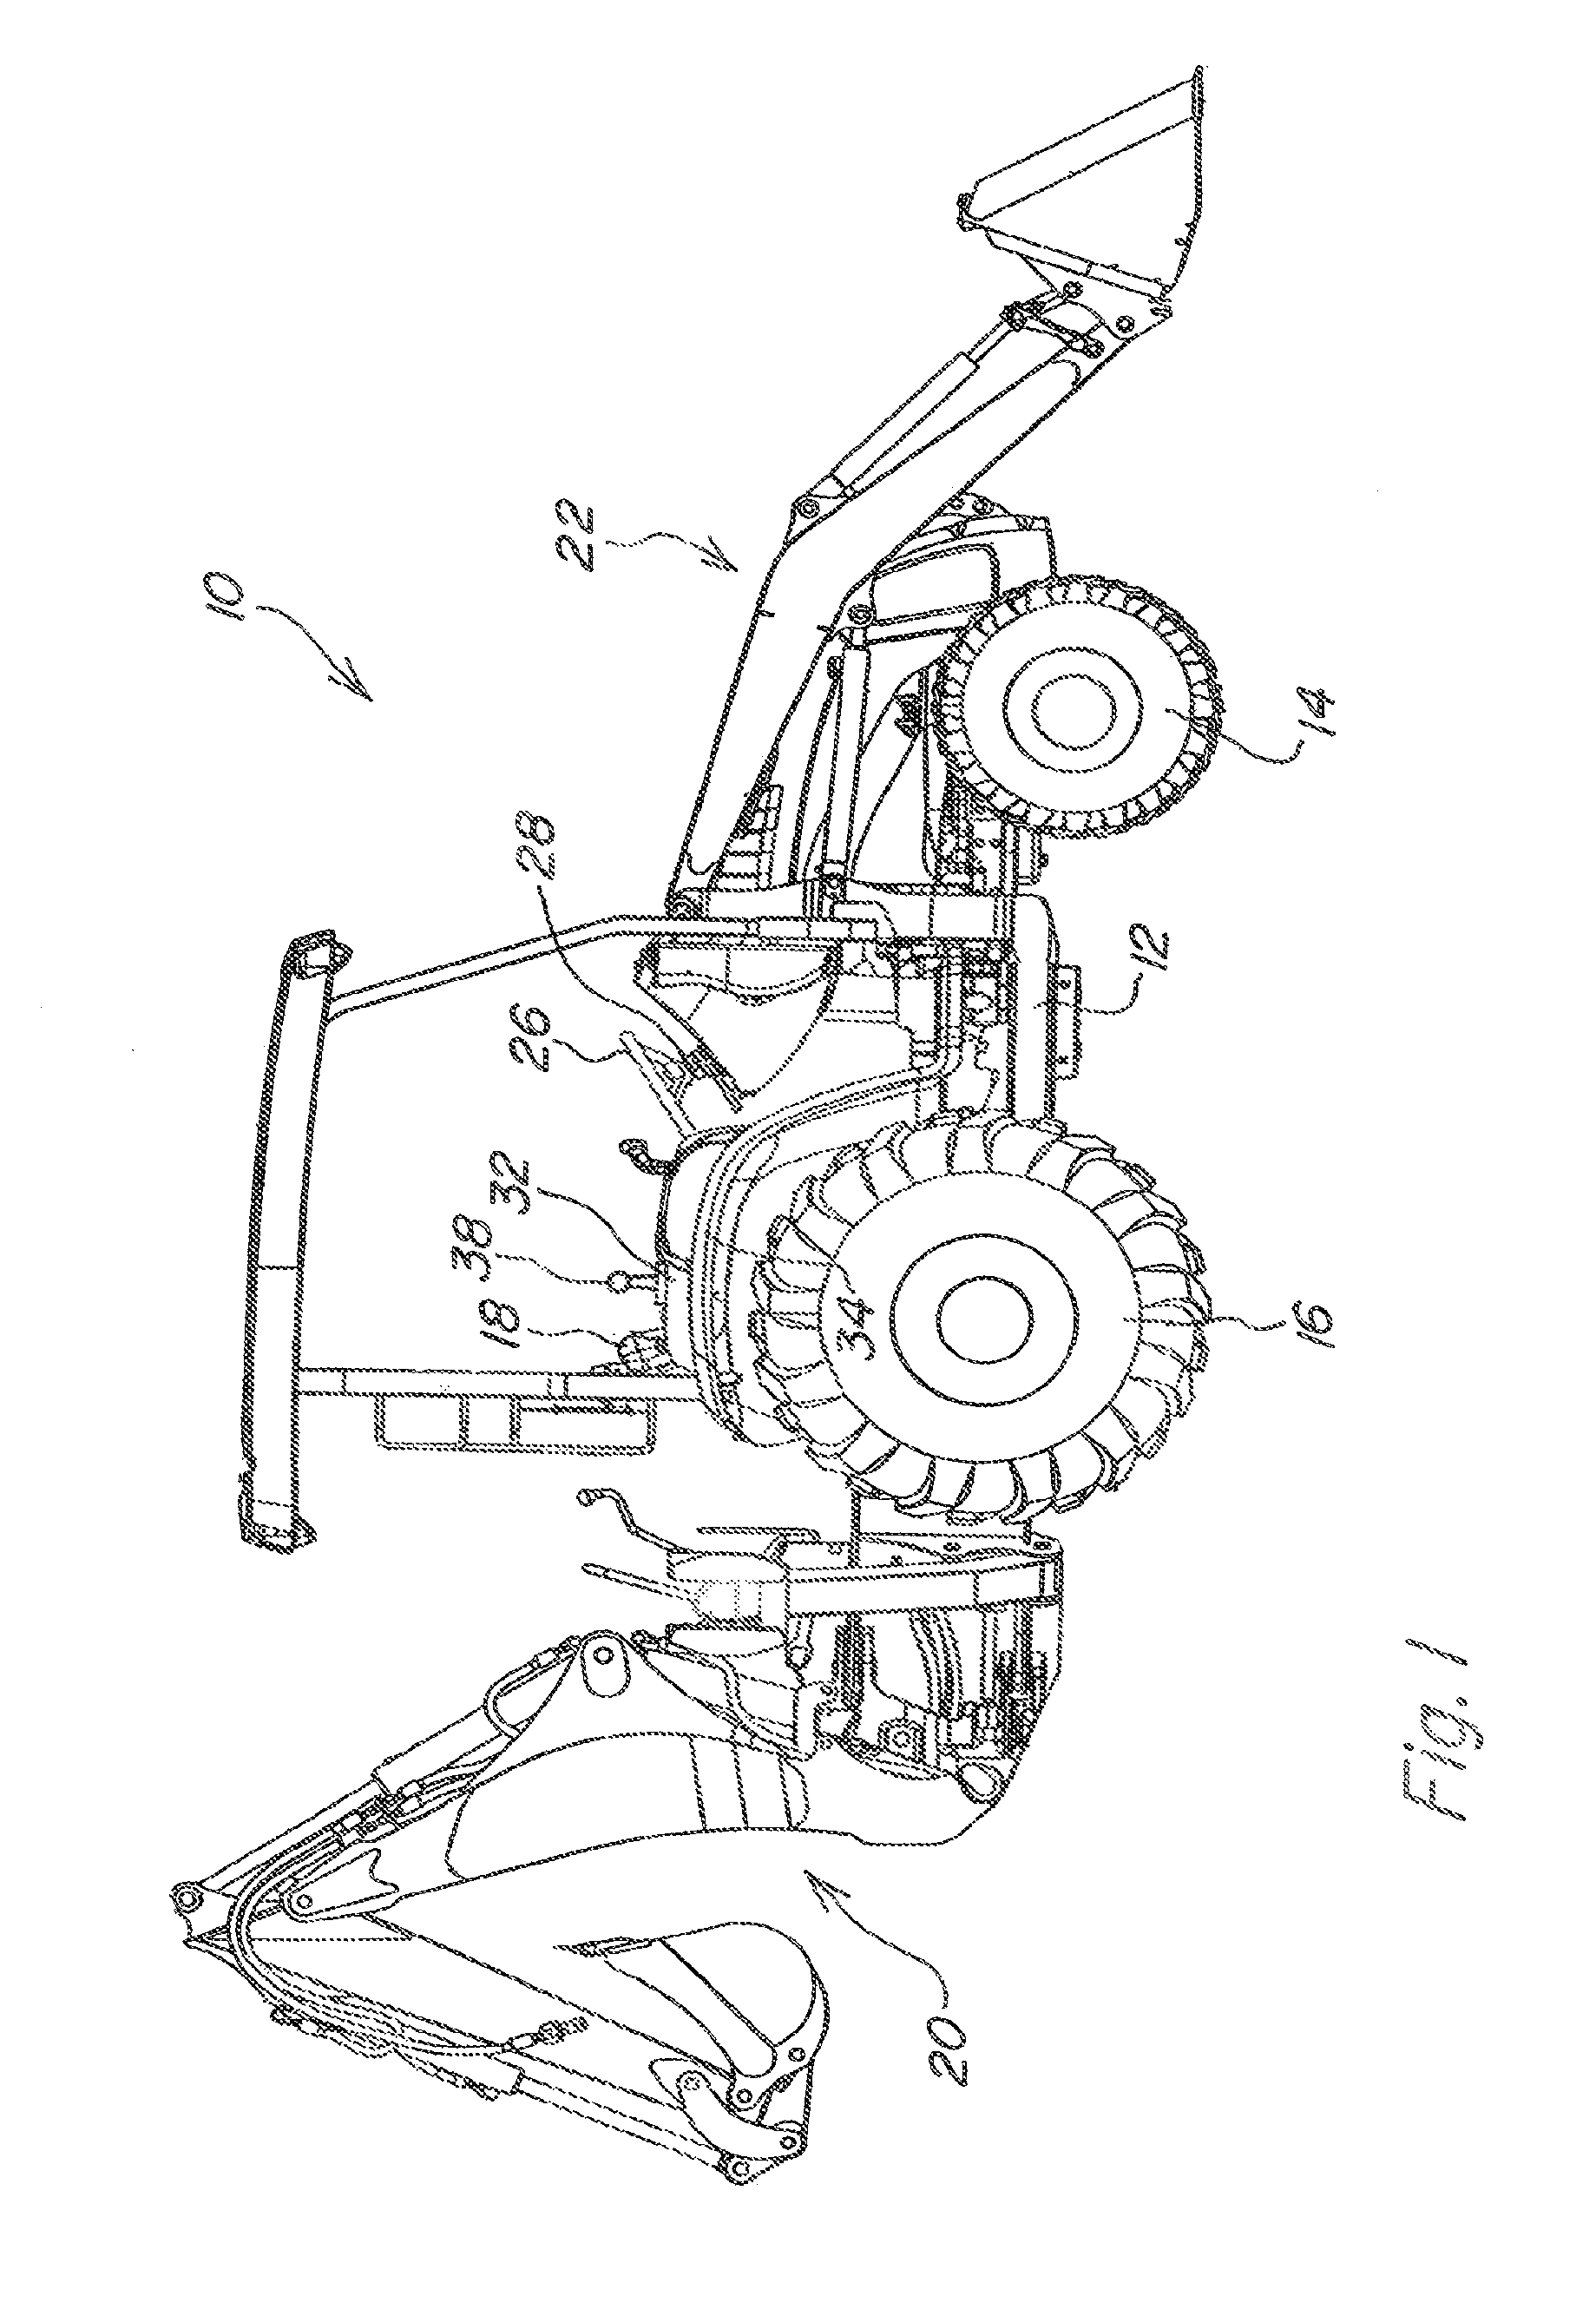 Creep steering control system operable from rearward-facing position